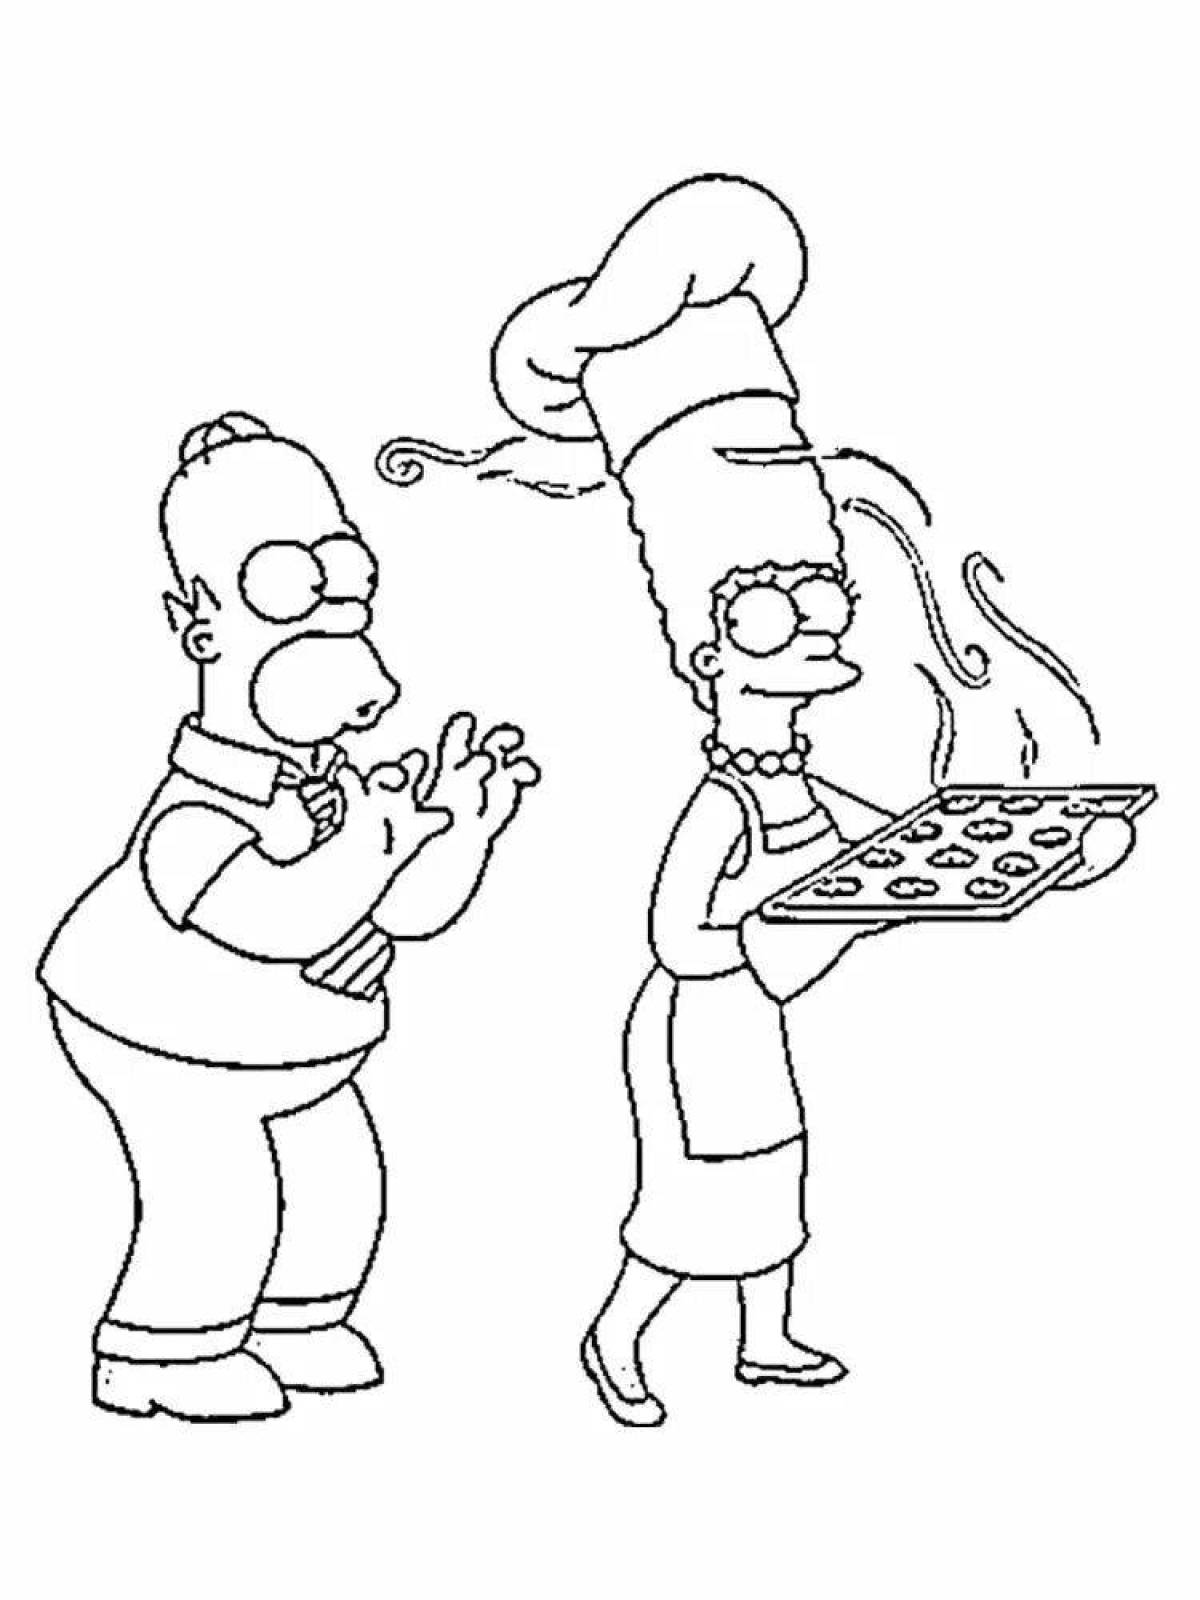 Marge simpson animated coloring page